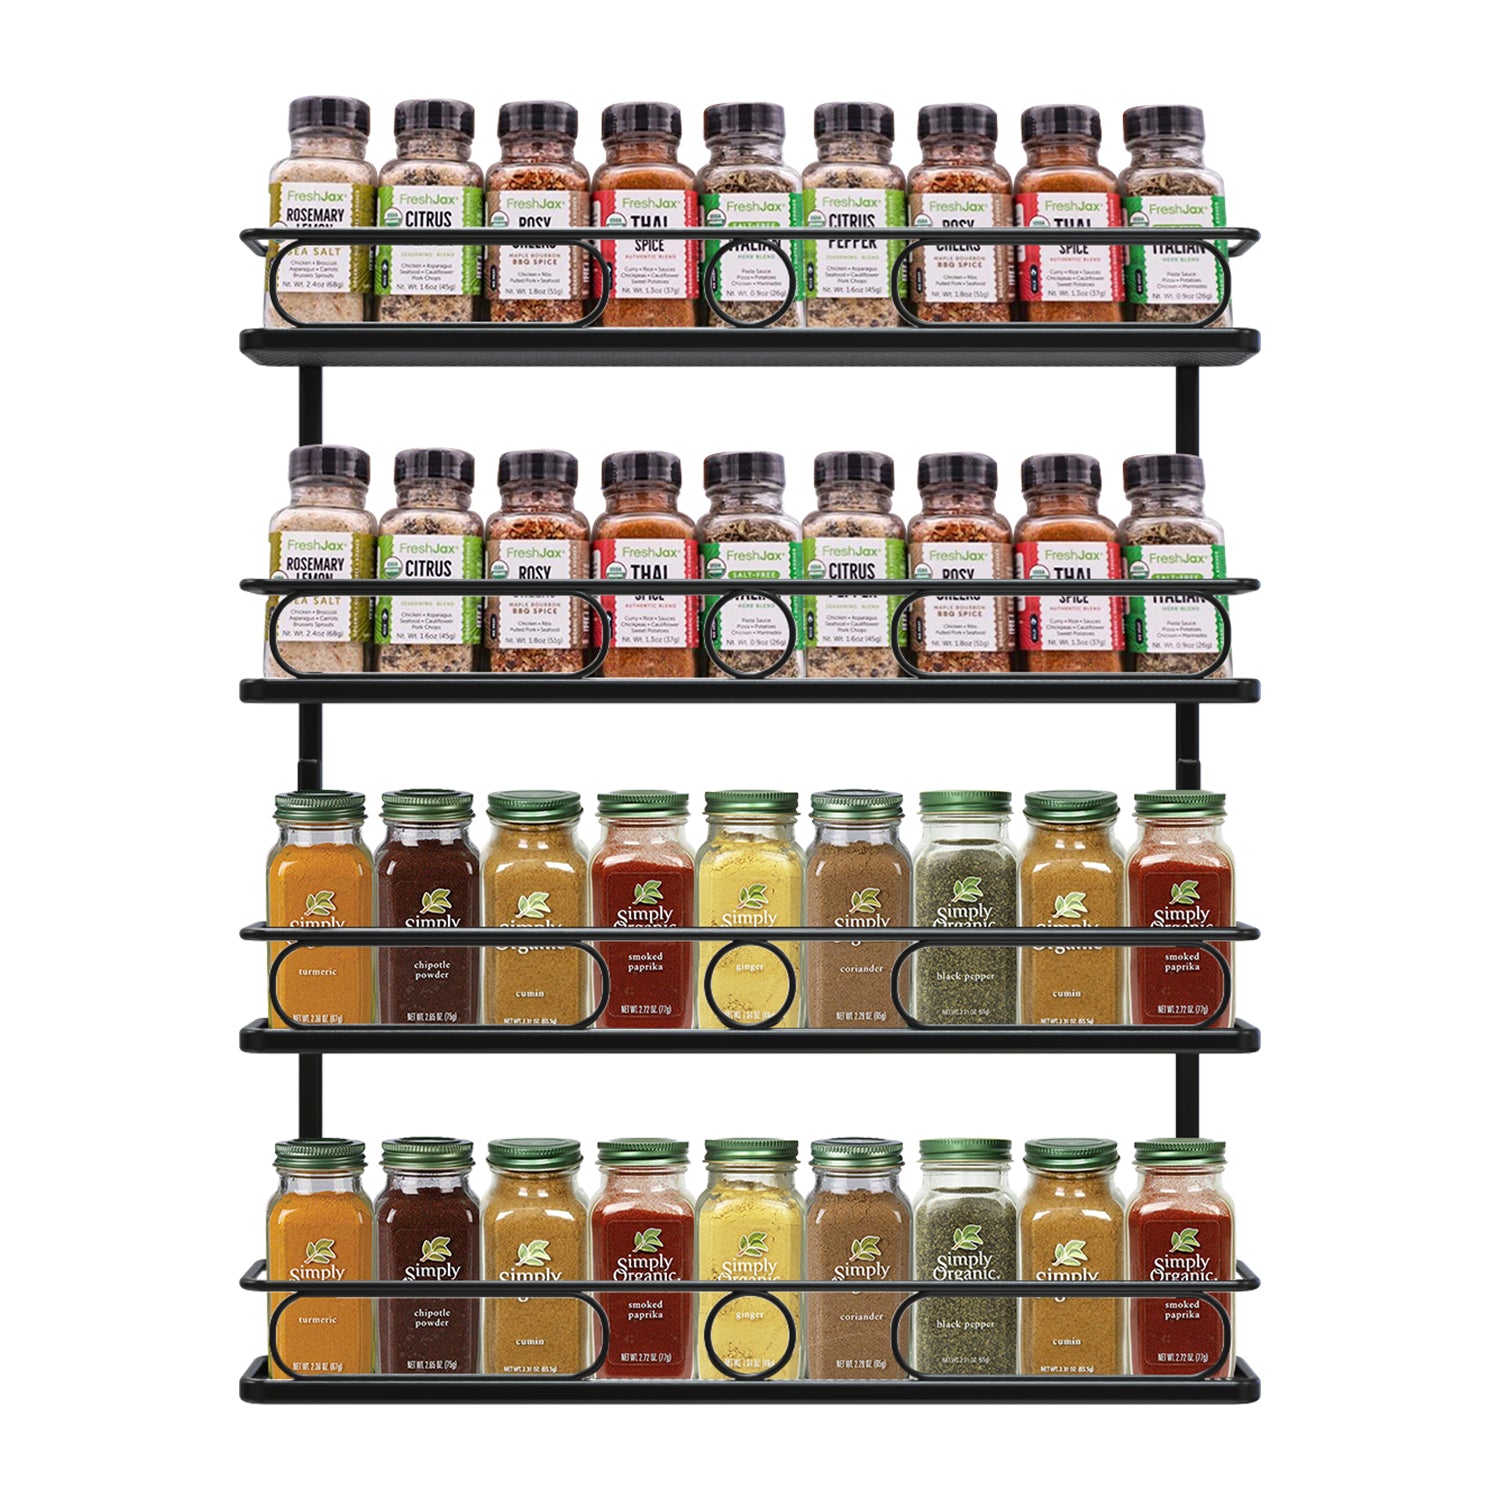 Wall Mounted Spice Rack Organizer for Cabinet Door, Set of 4 Condiment Seasoning  Organizer Wall Spice Rack Hanging Shelf for Spice Jars, Spice Jar Holder  for Kitchen Cabinet Pantry Door (Black) 